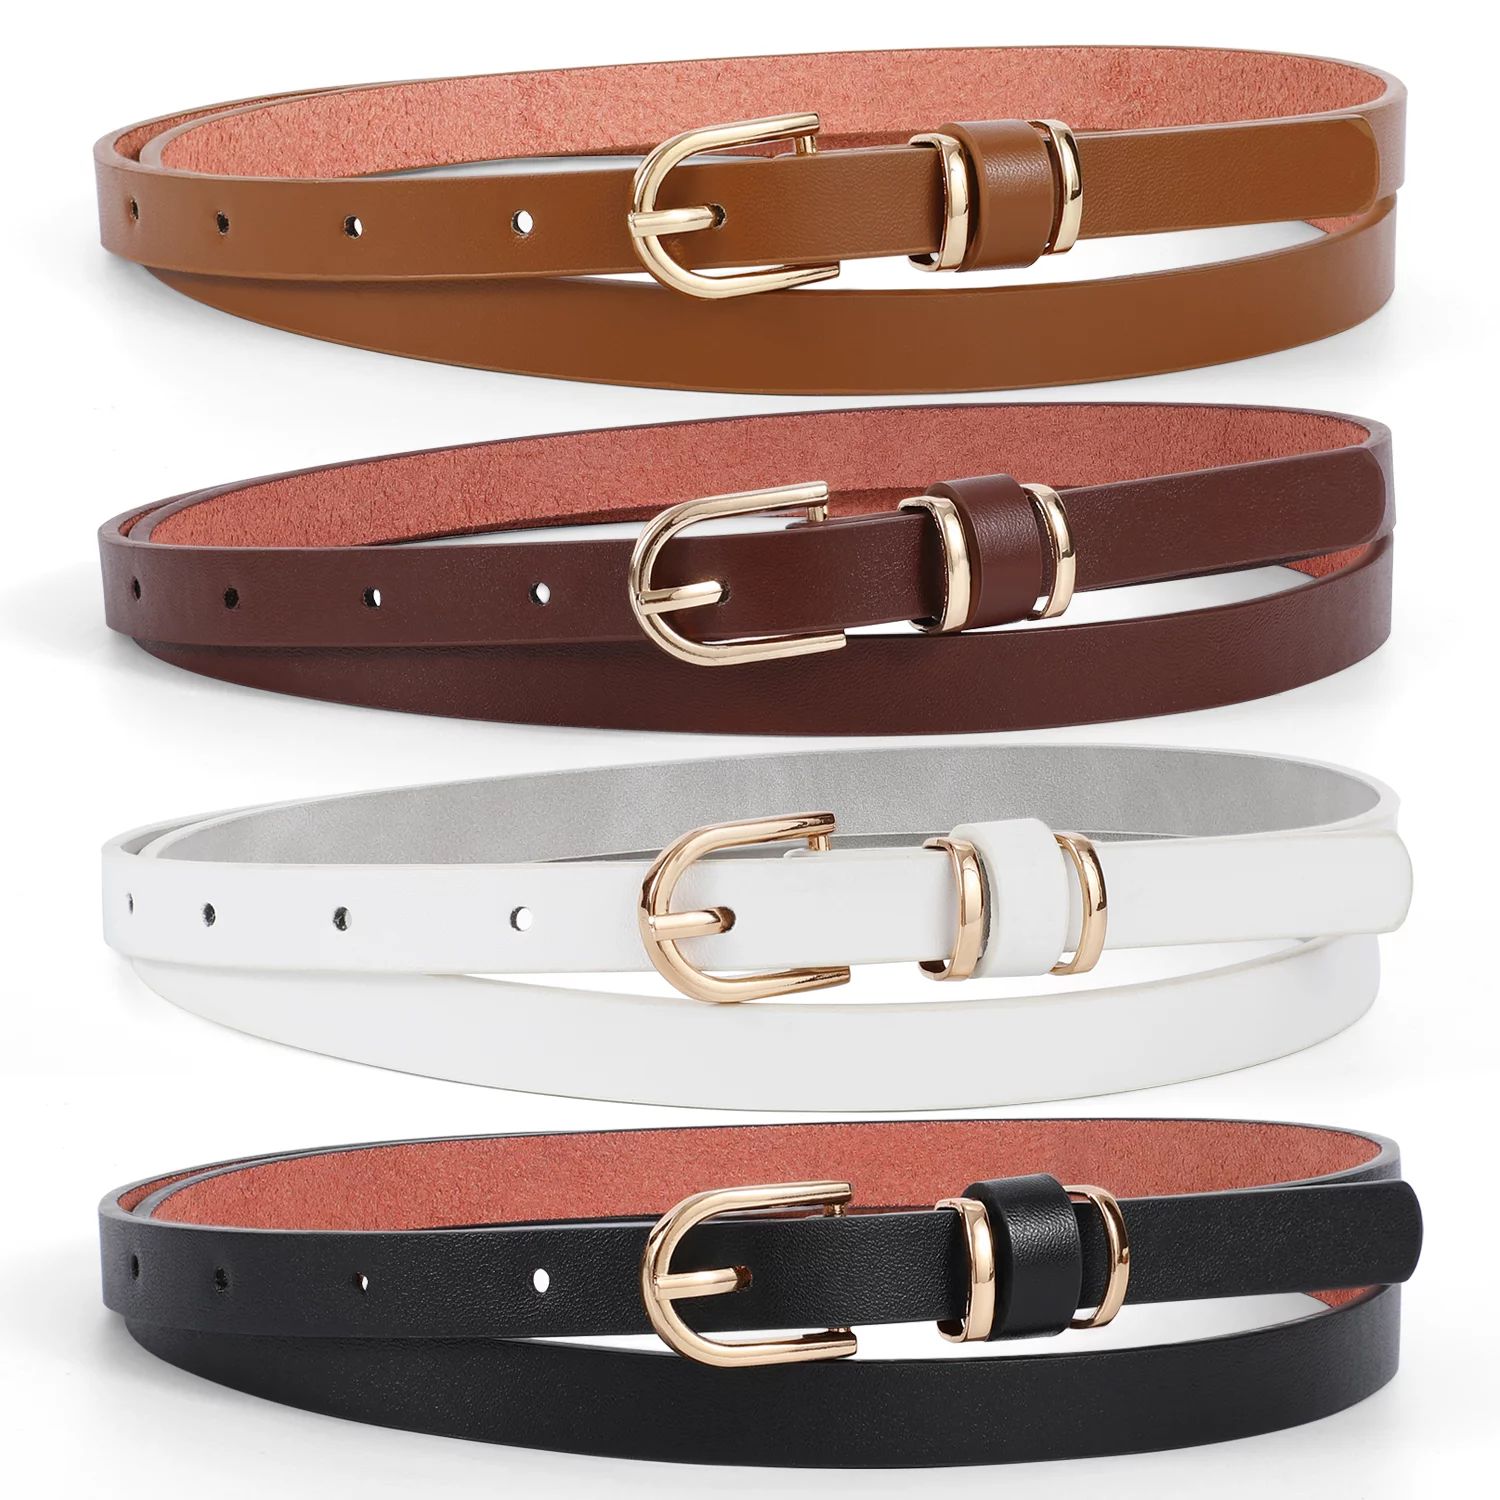 JASGOOD Set of 4 Women's Skinny Leather Belt for Jeans Pants with Gold Alloy Buckle | Walmart (US)